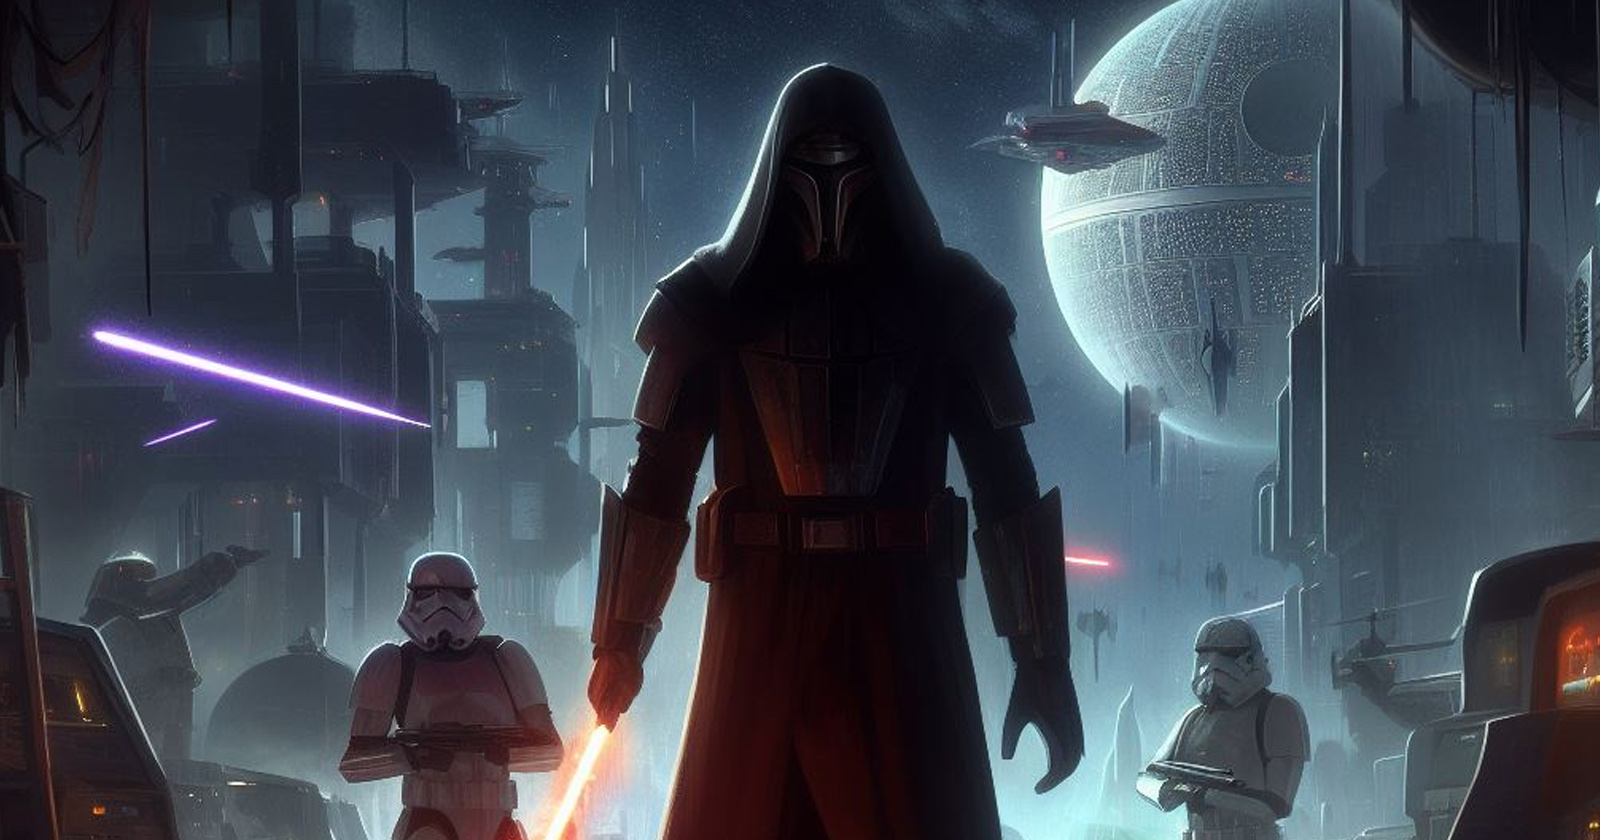 Two years of disappointment! What was expected for the legendary Star Wars game